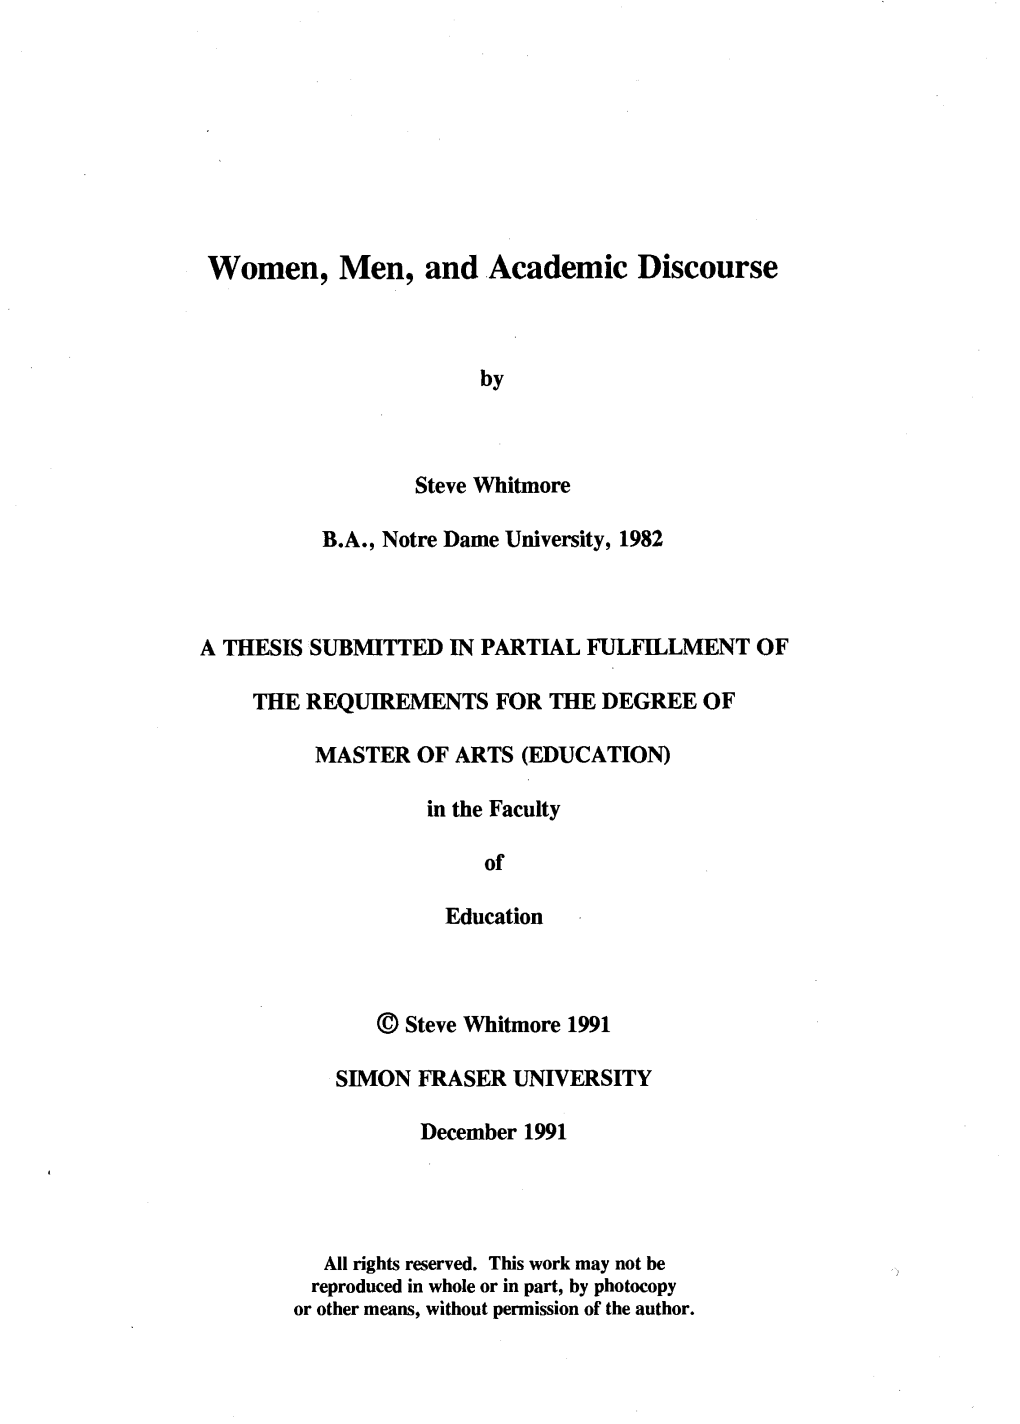 Women, Men and Academic Discourse / by Steve Whitmore